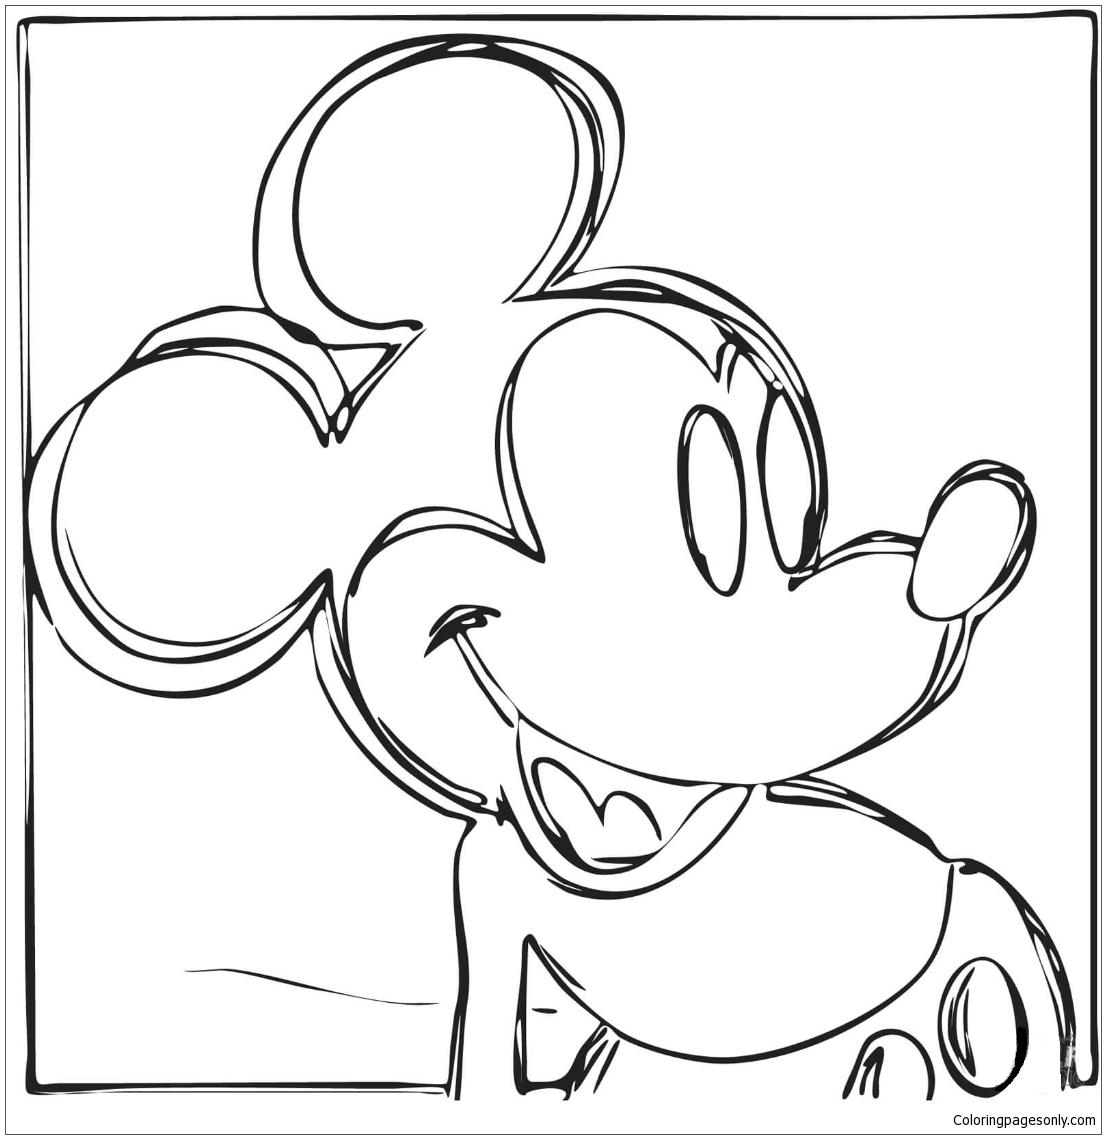 Mickey Mouse By Andy Warhol Coloring Page